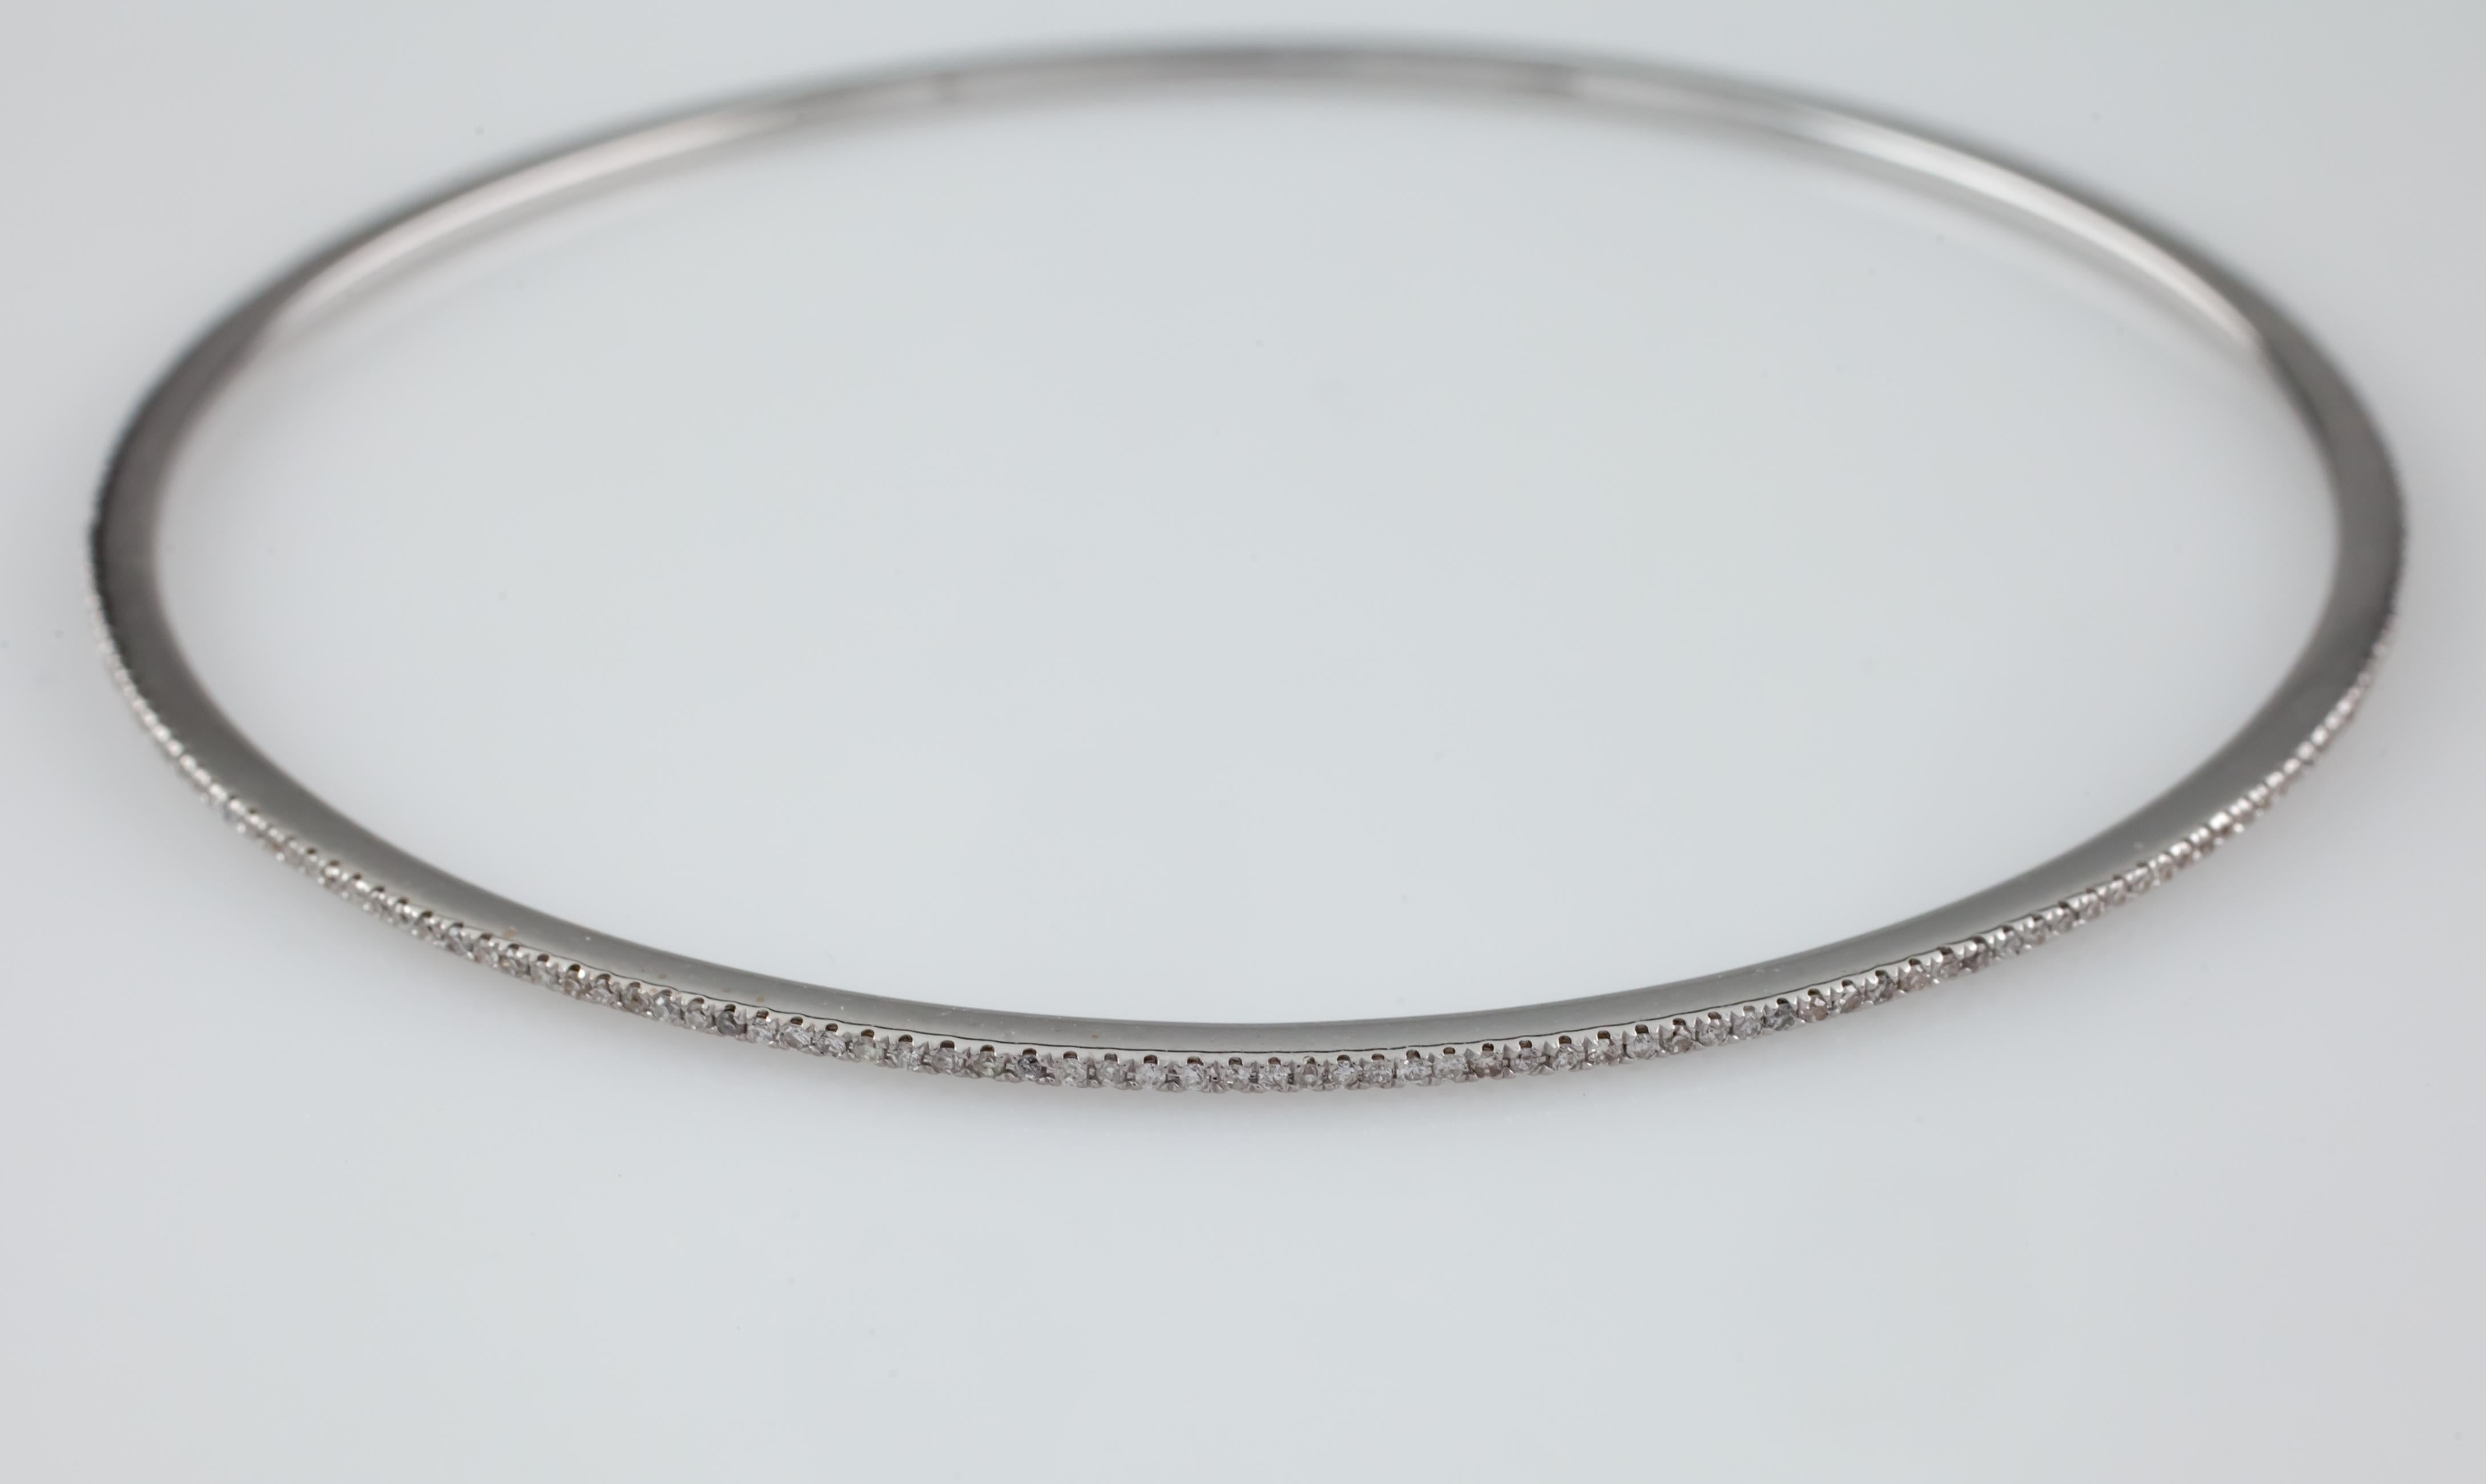 Gorgeous Diamond Bangle Bracelet 
Features an unbroken row of bead set bead diamonds
Total Diamond Weight = Approximately 1 carat
Average Color = G - H
Average Clarity = VS - SI
Inner Circumference (Wrist Fit) = 7